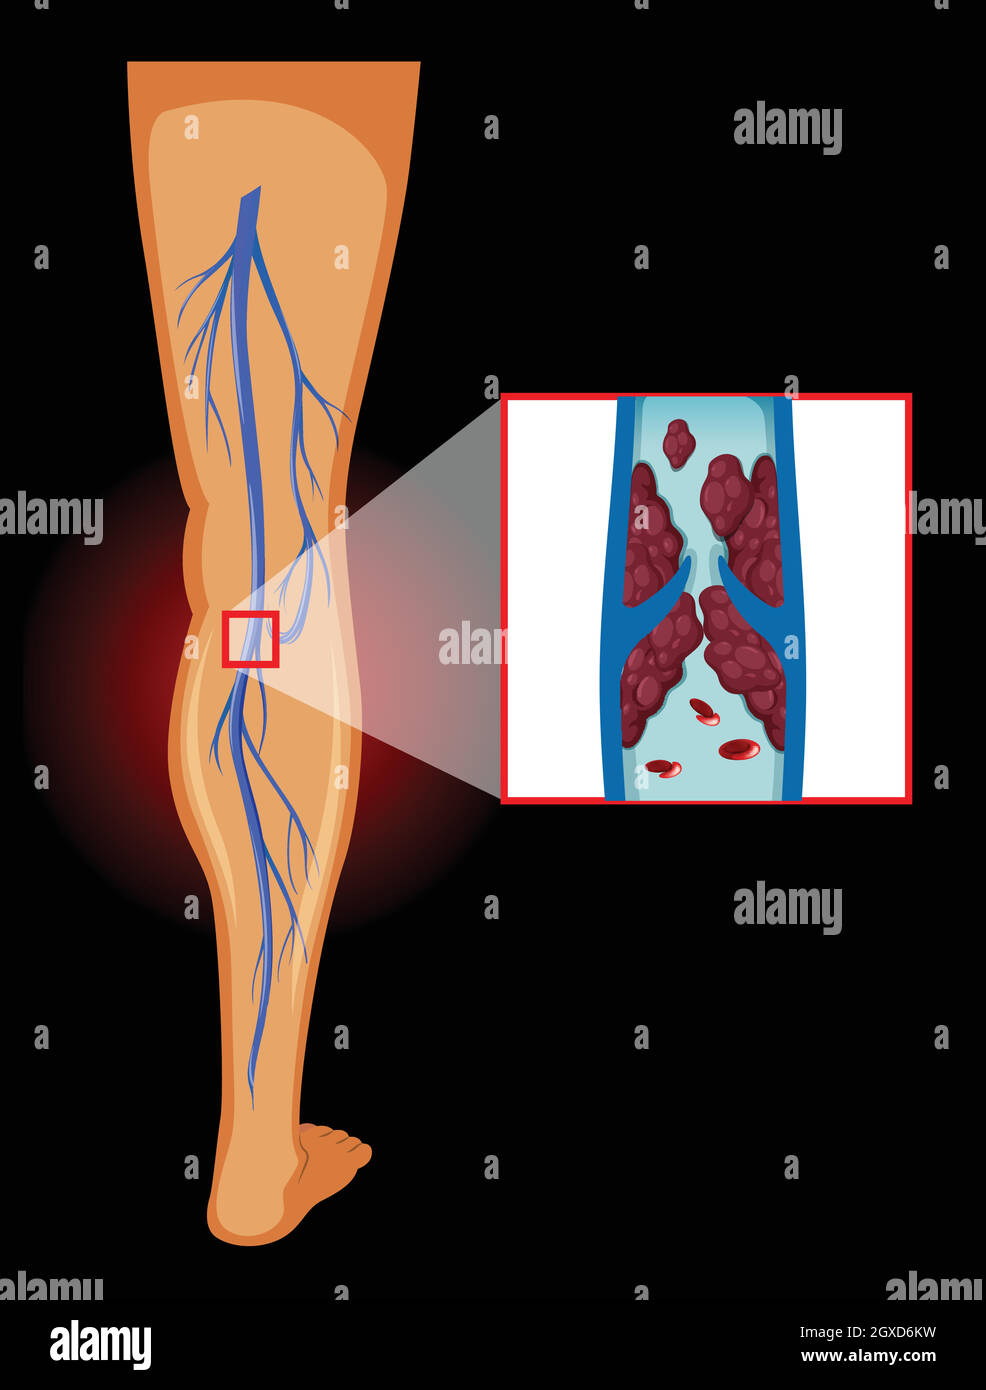 Medical Image of Varicose Veins Stock Vector